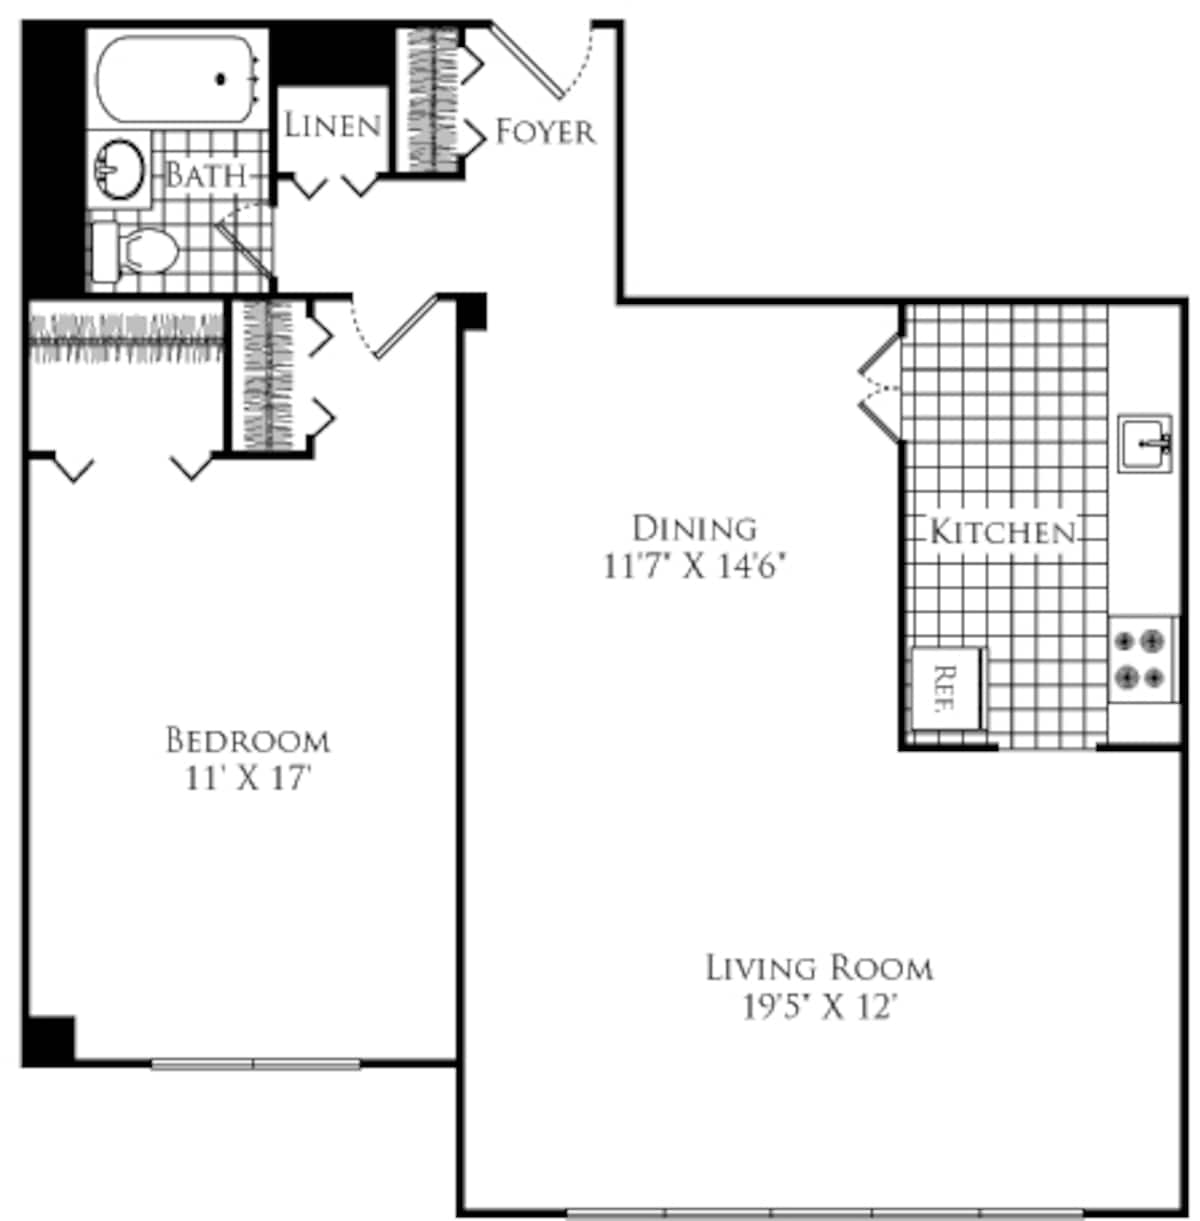 Floorplan diagram for The Newell, showing 1 bedroom